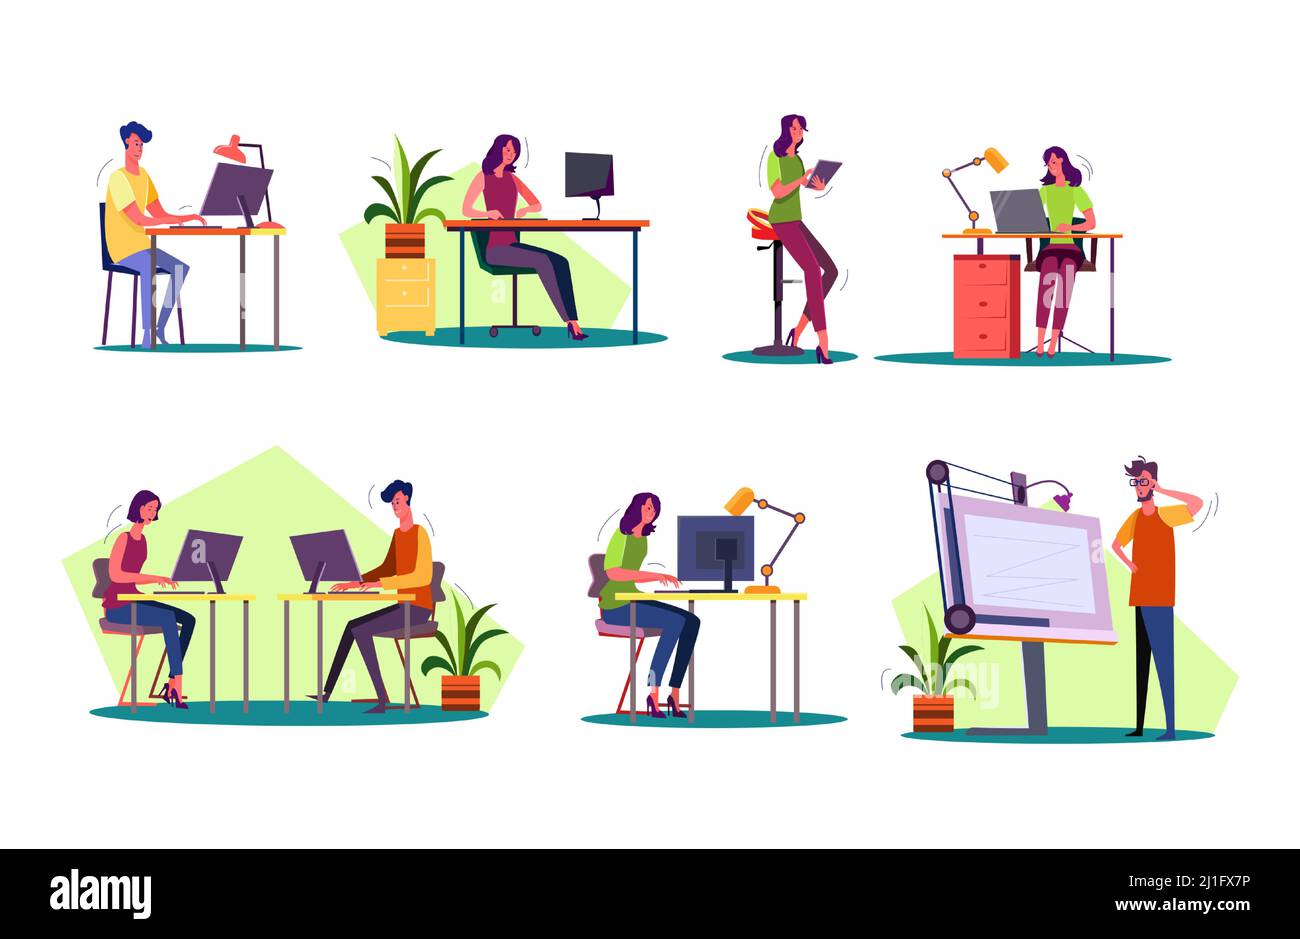 Professional at workplaces set. Man and woman working on desktop, laptop, tablet, blueprint. Business concept. Vector illustration for posters, presen Stock Vector